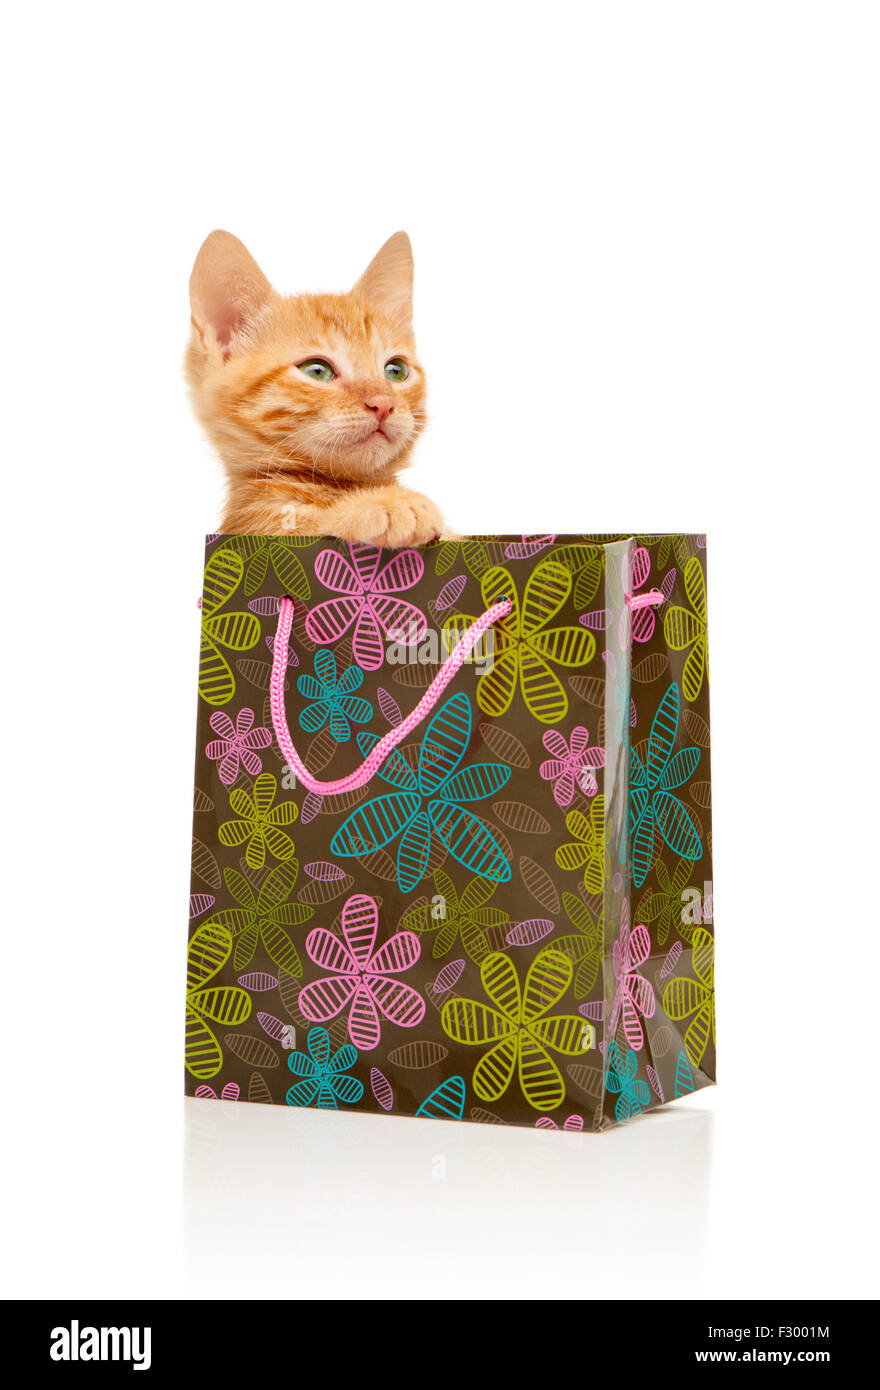 Seriously glamorous little red kitten sitting in flowered green, pink and blue shopping bag, isolated on a white background Stock Photo